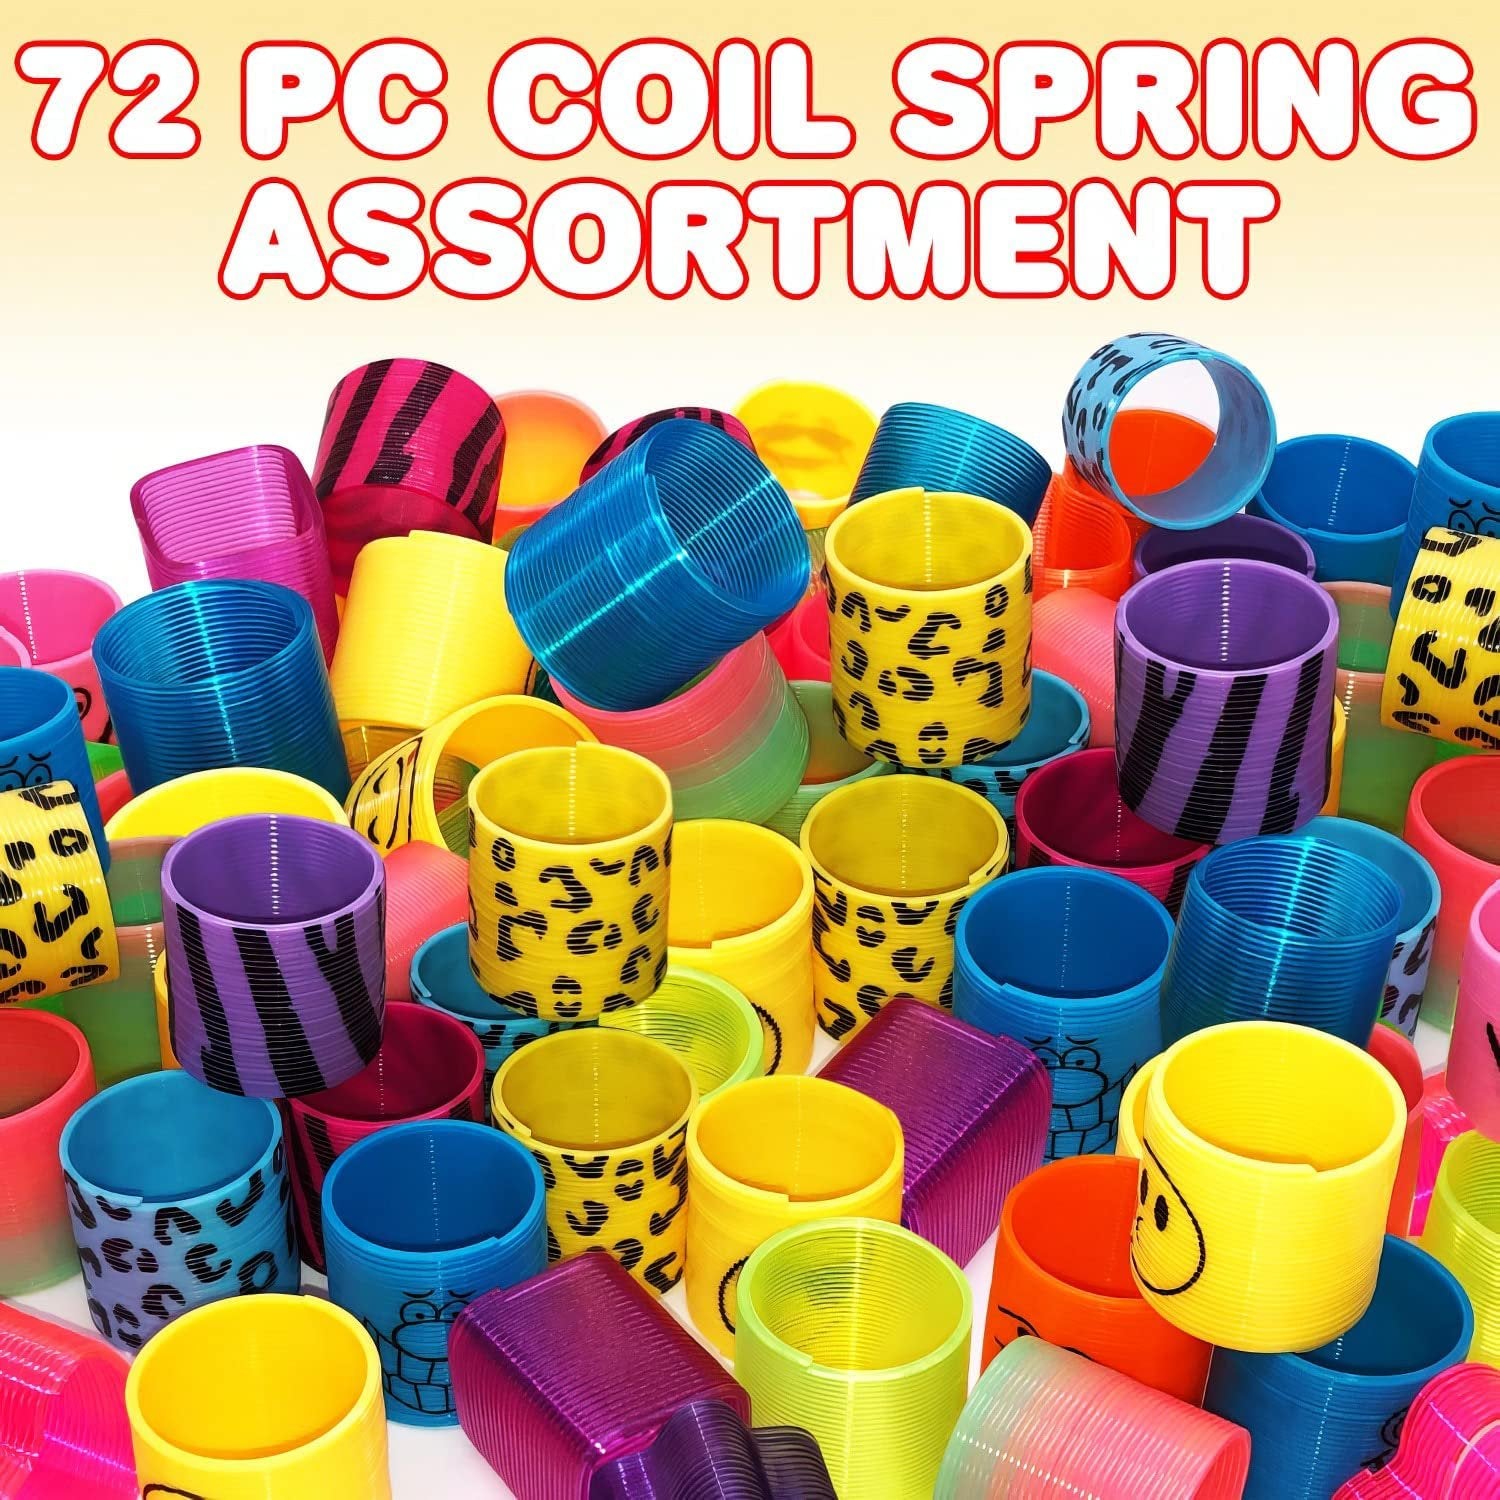 ArtCreativity Spring Toy Assortment, Pack of 72 Mini Plastic Coil Springs Party Favors for Kids, Multicolor with Different Shapes, Goody Bag Filler, Party Prizes and Stocking Stuffers for Kids